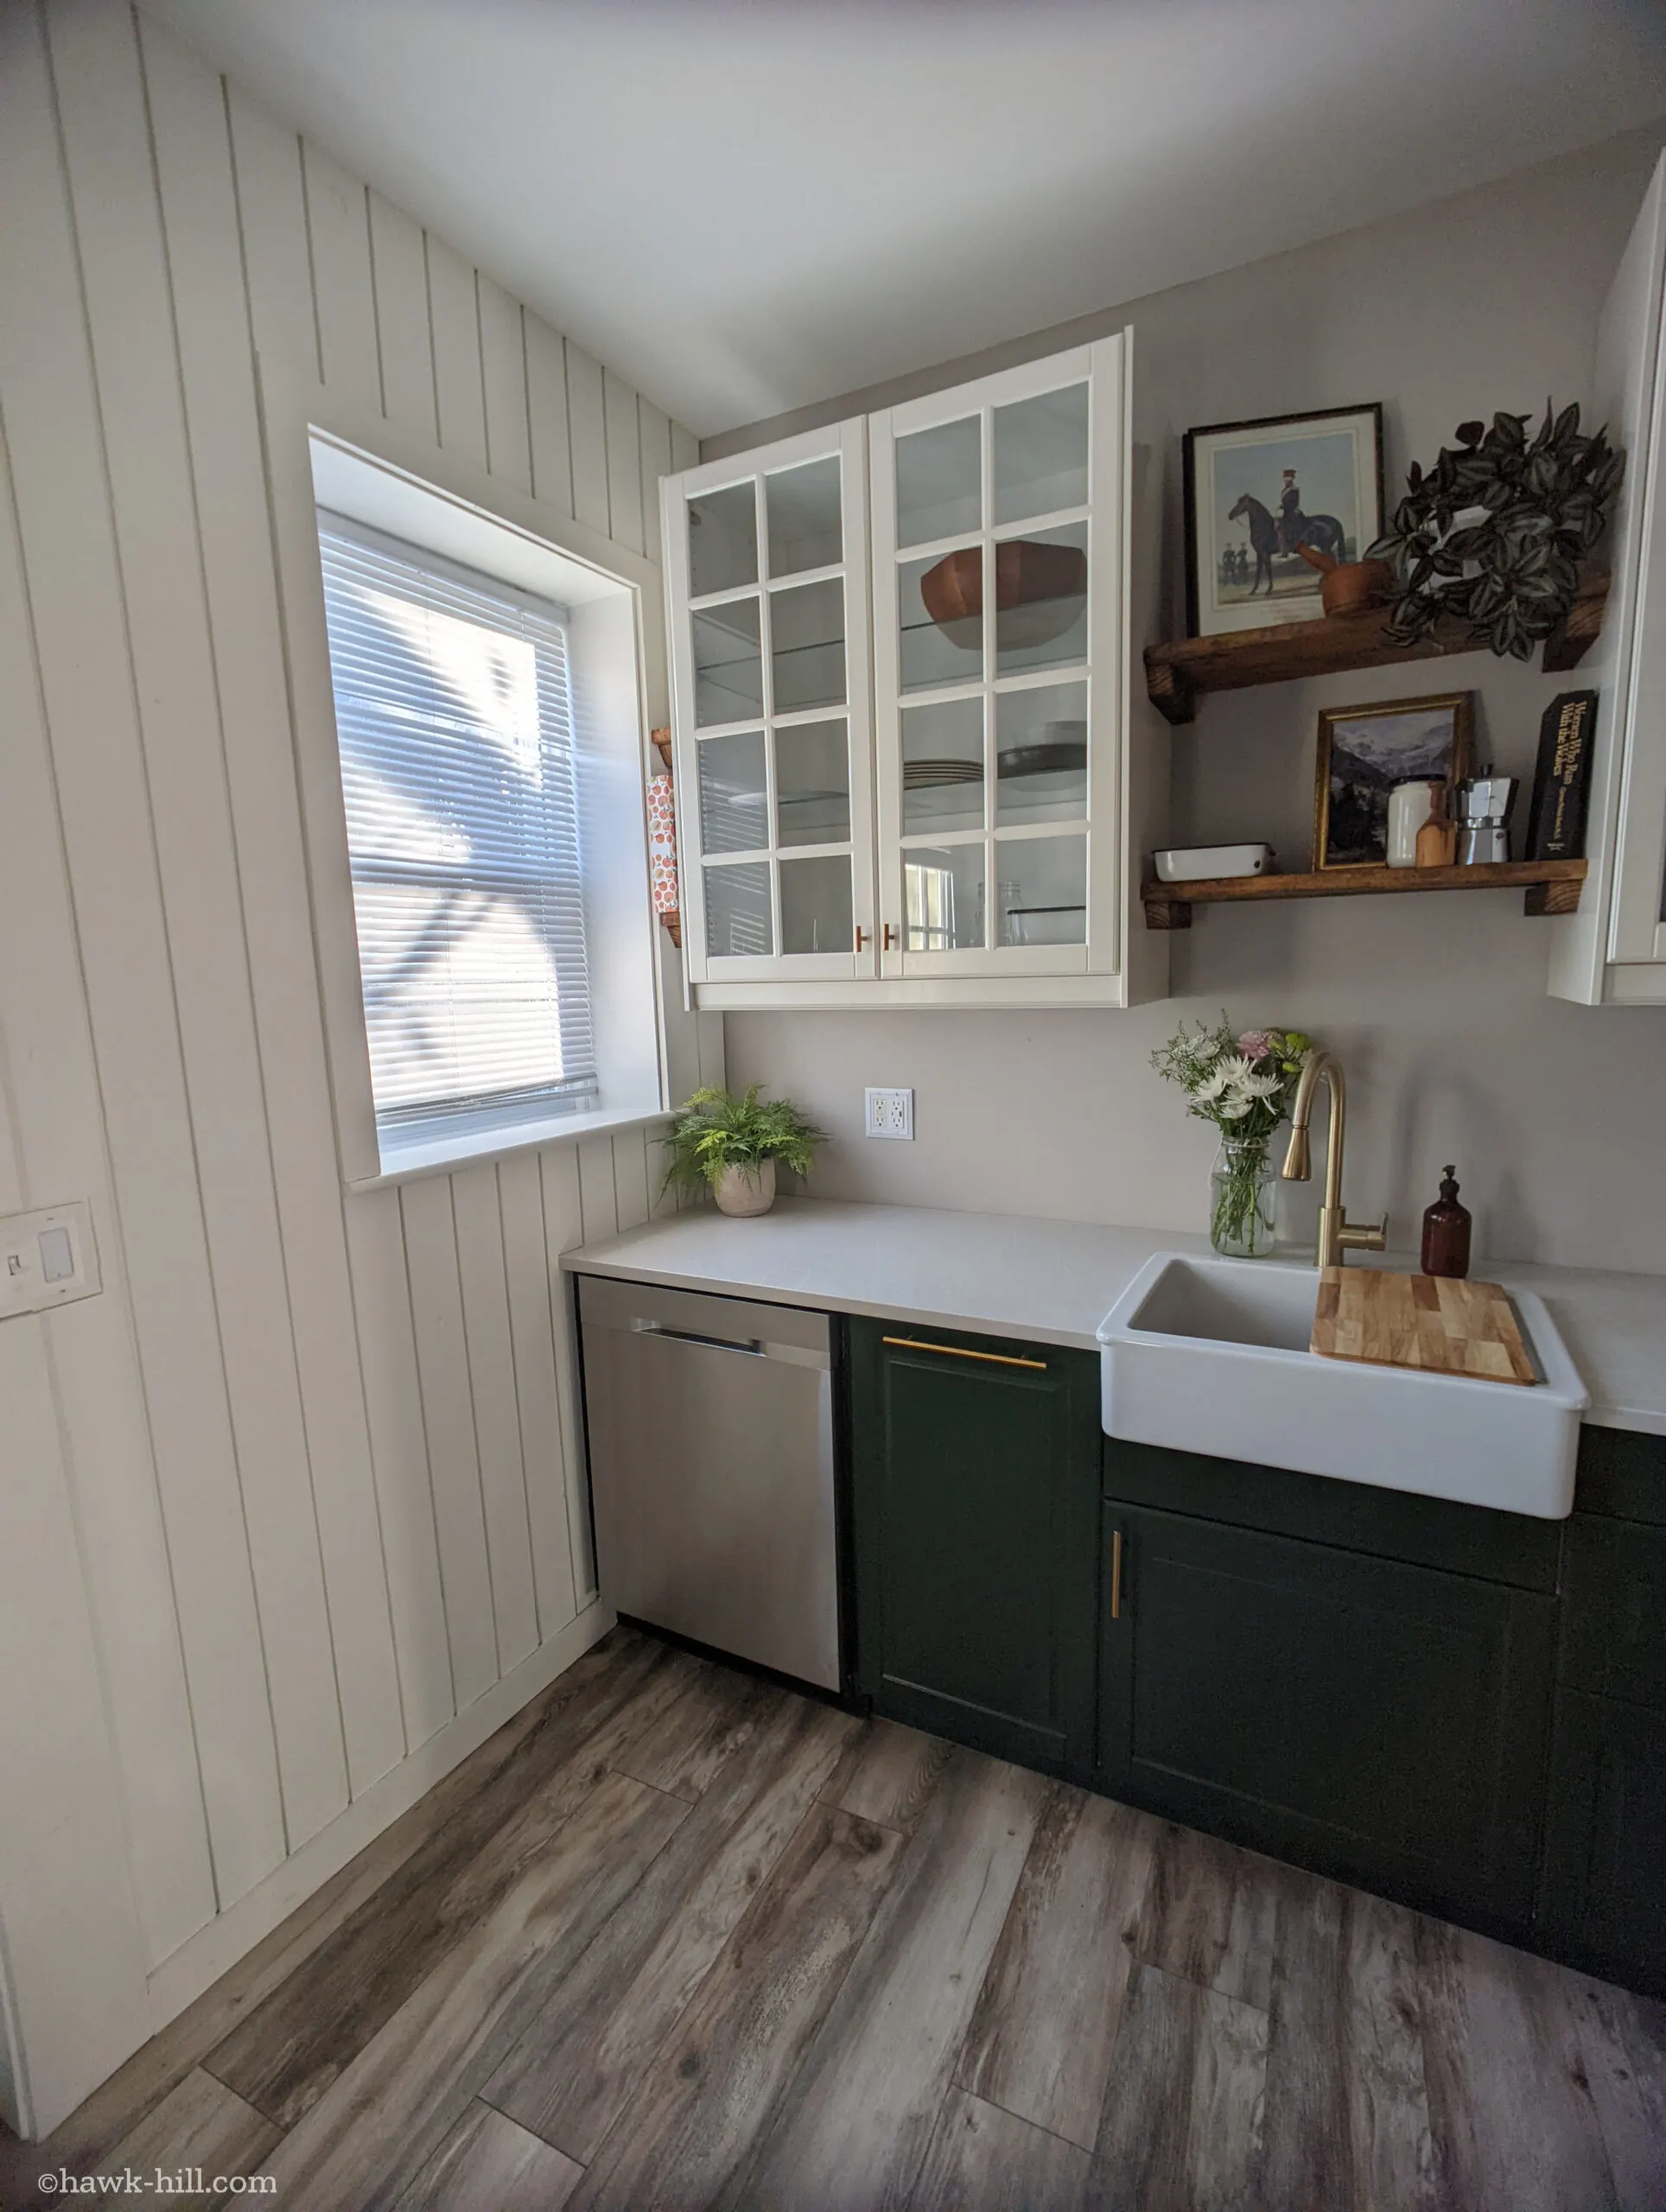 A luxurious budget kitchen remodel for this small galley kitchen.